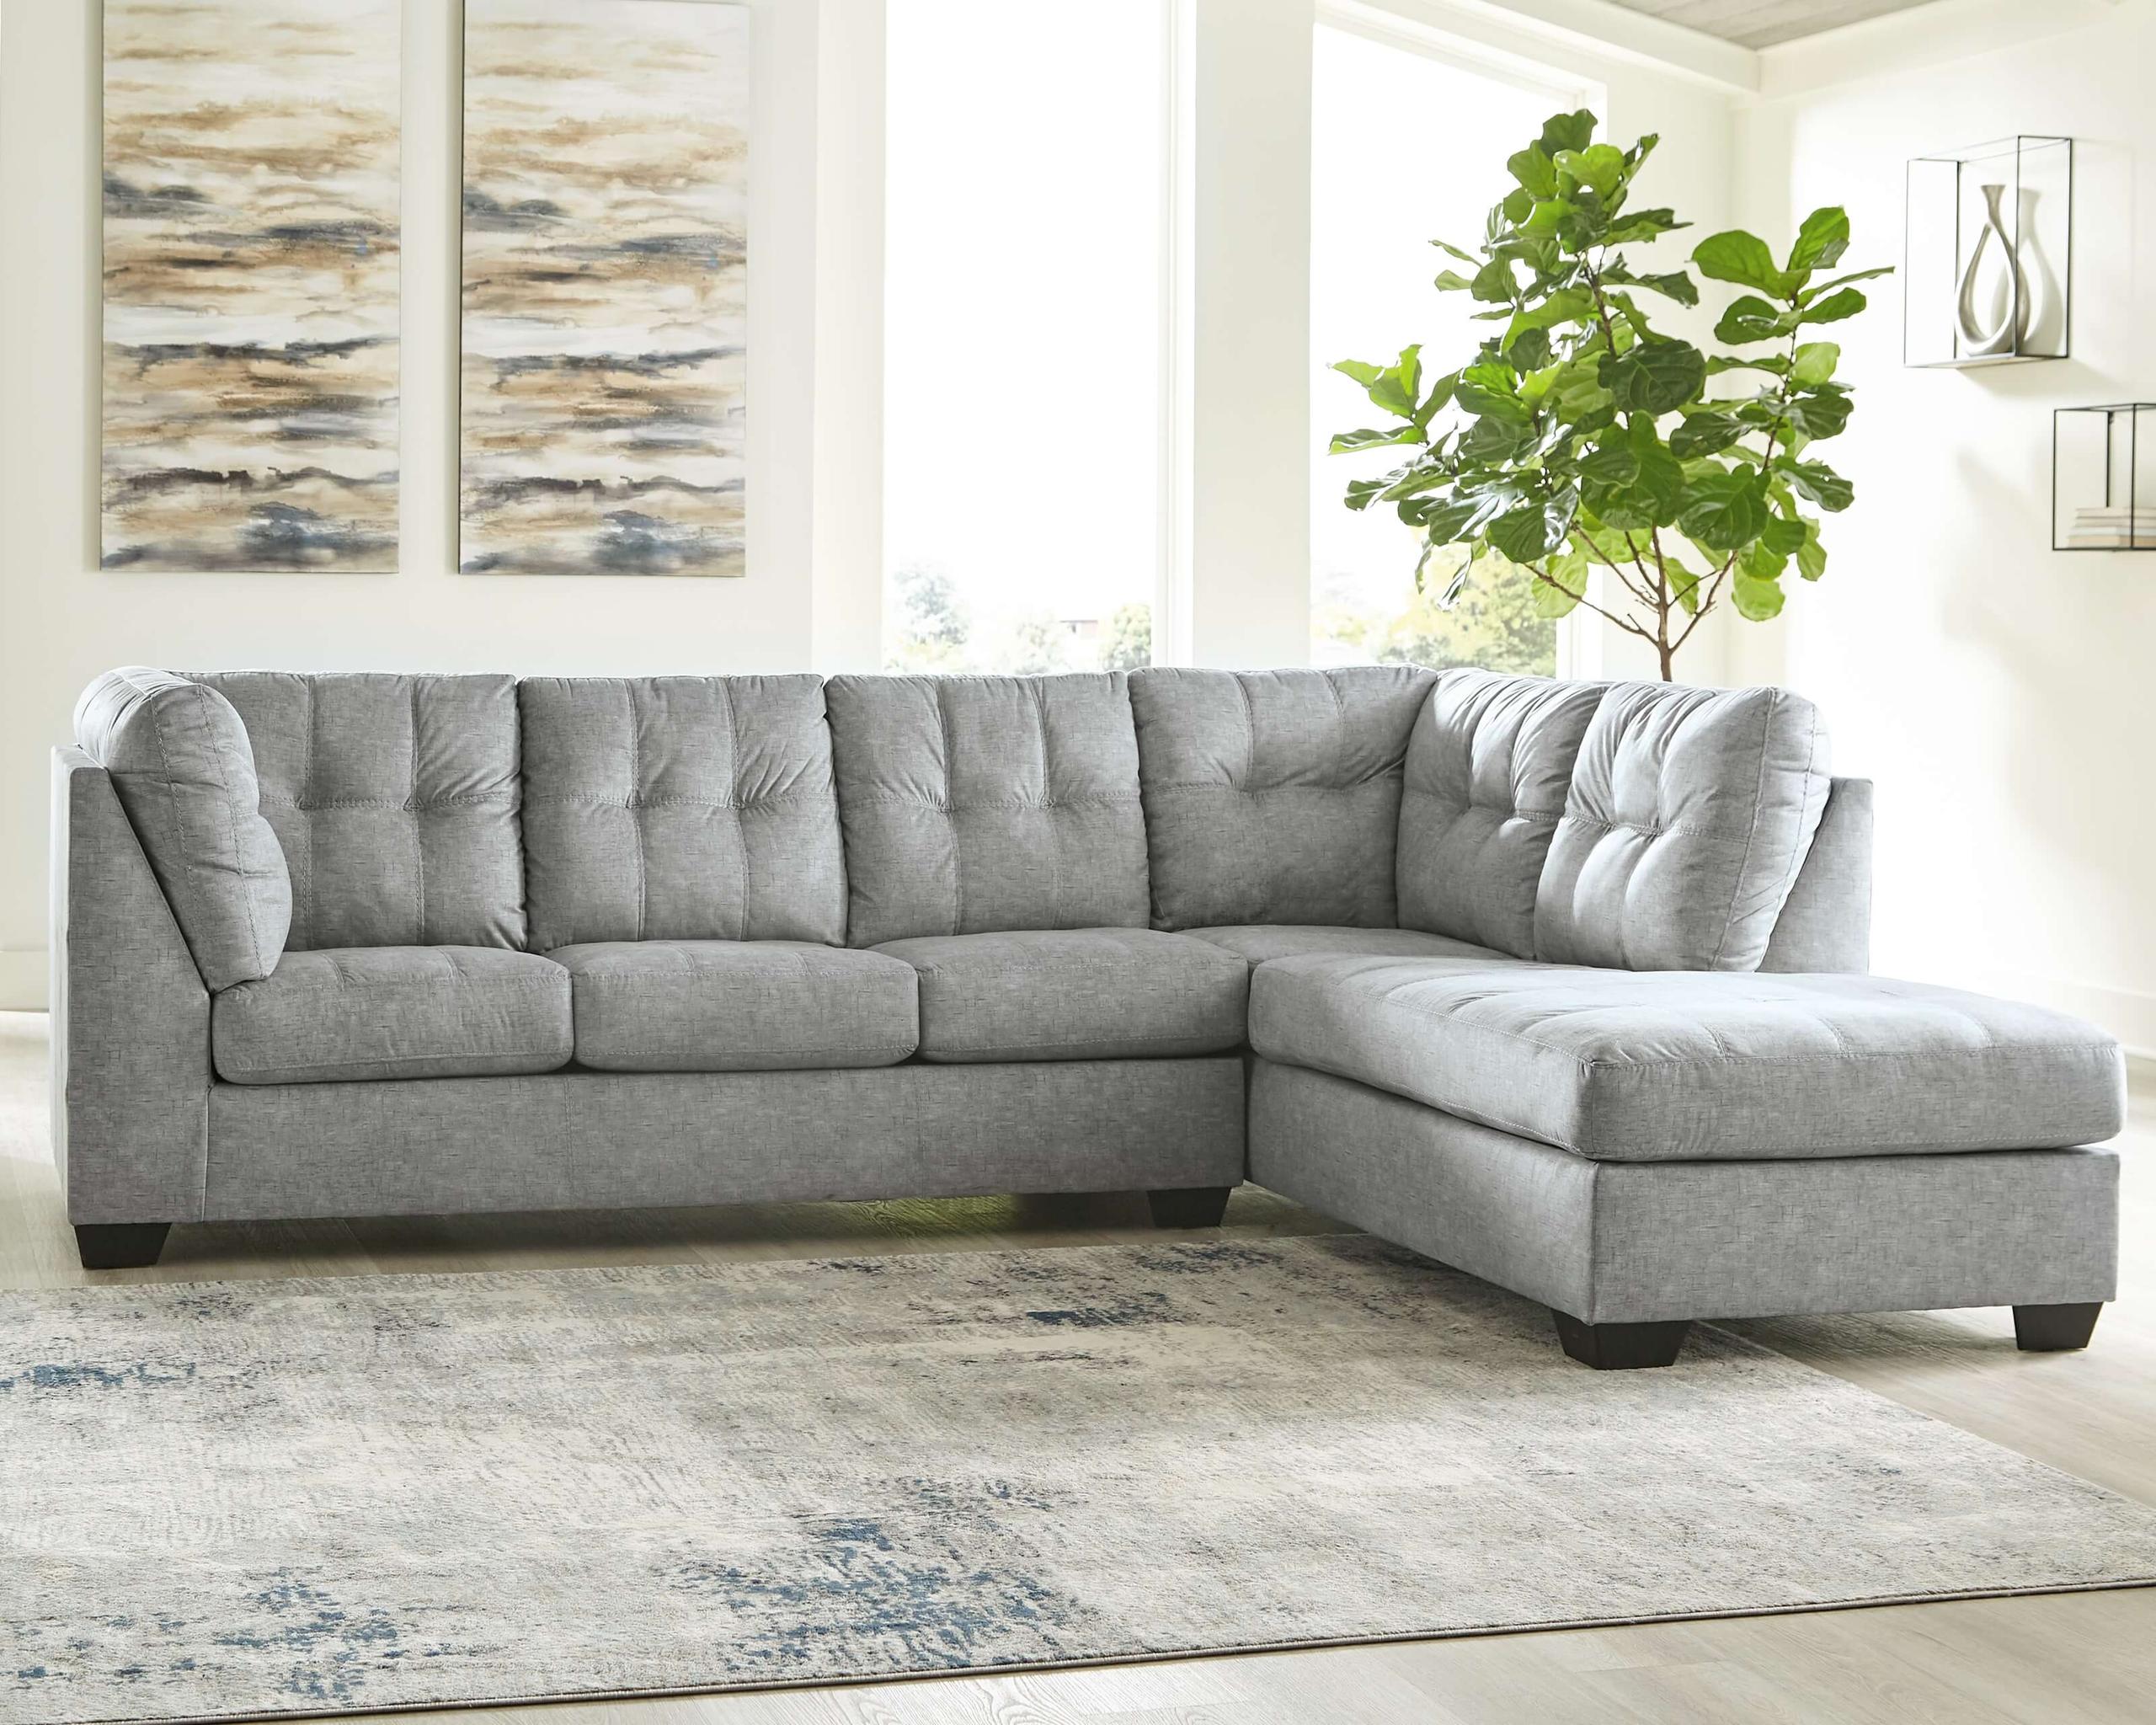 ASHLEY FURNITURE 80804S4 Falkirk 2-piece Sectional With Chaise and Sleeper